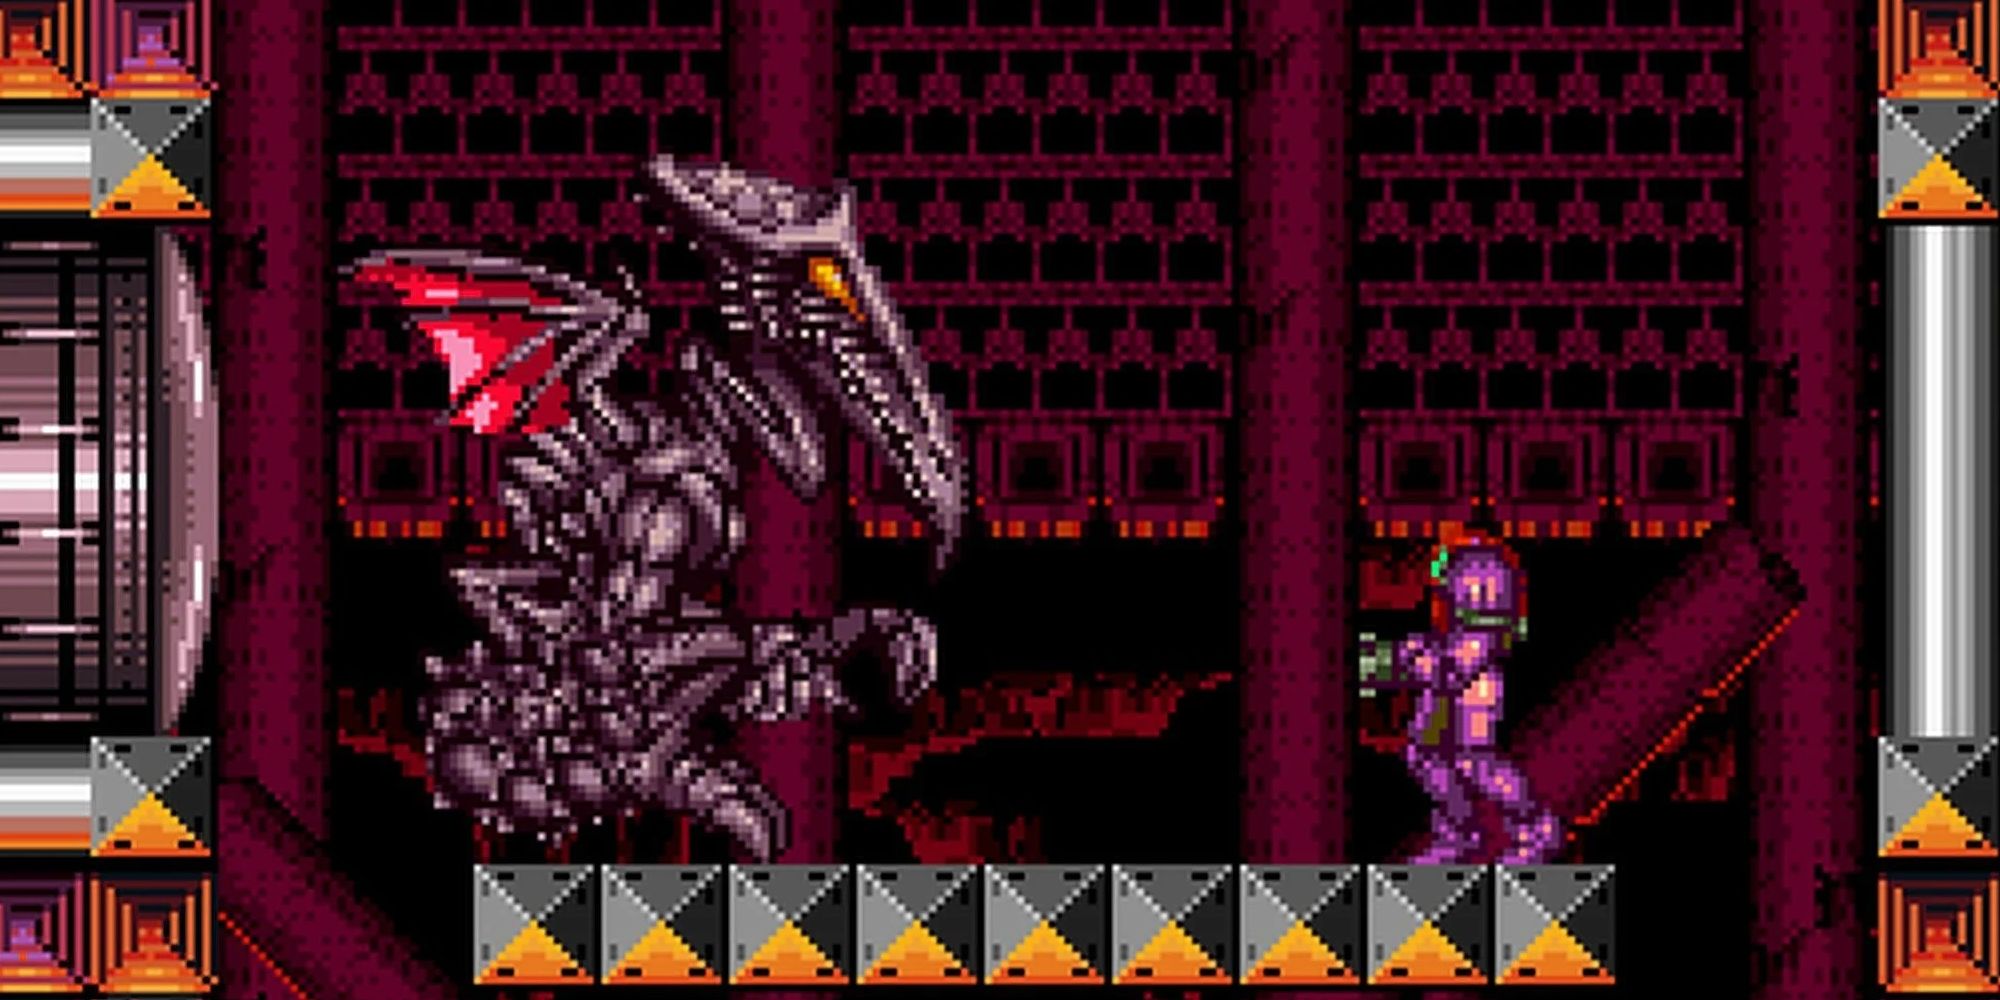 Samus facing off against Ridley in a small room in Super Metroid